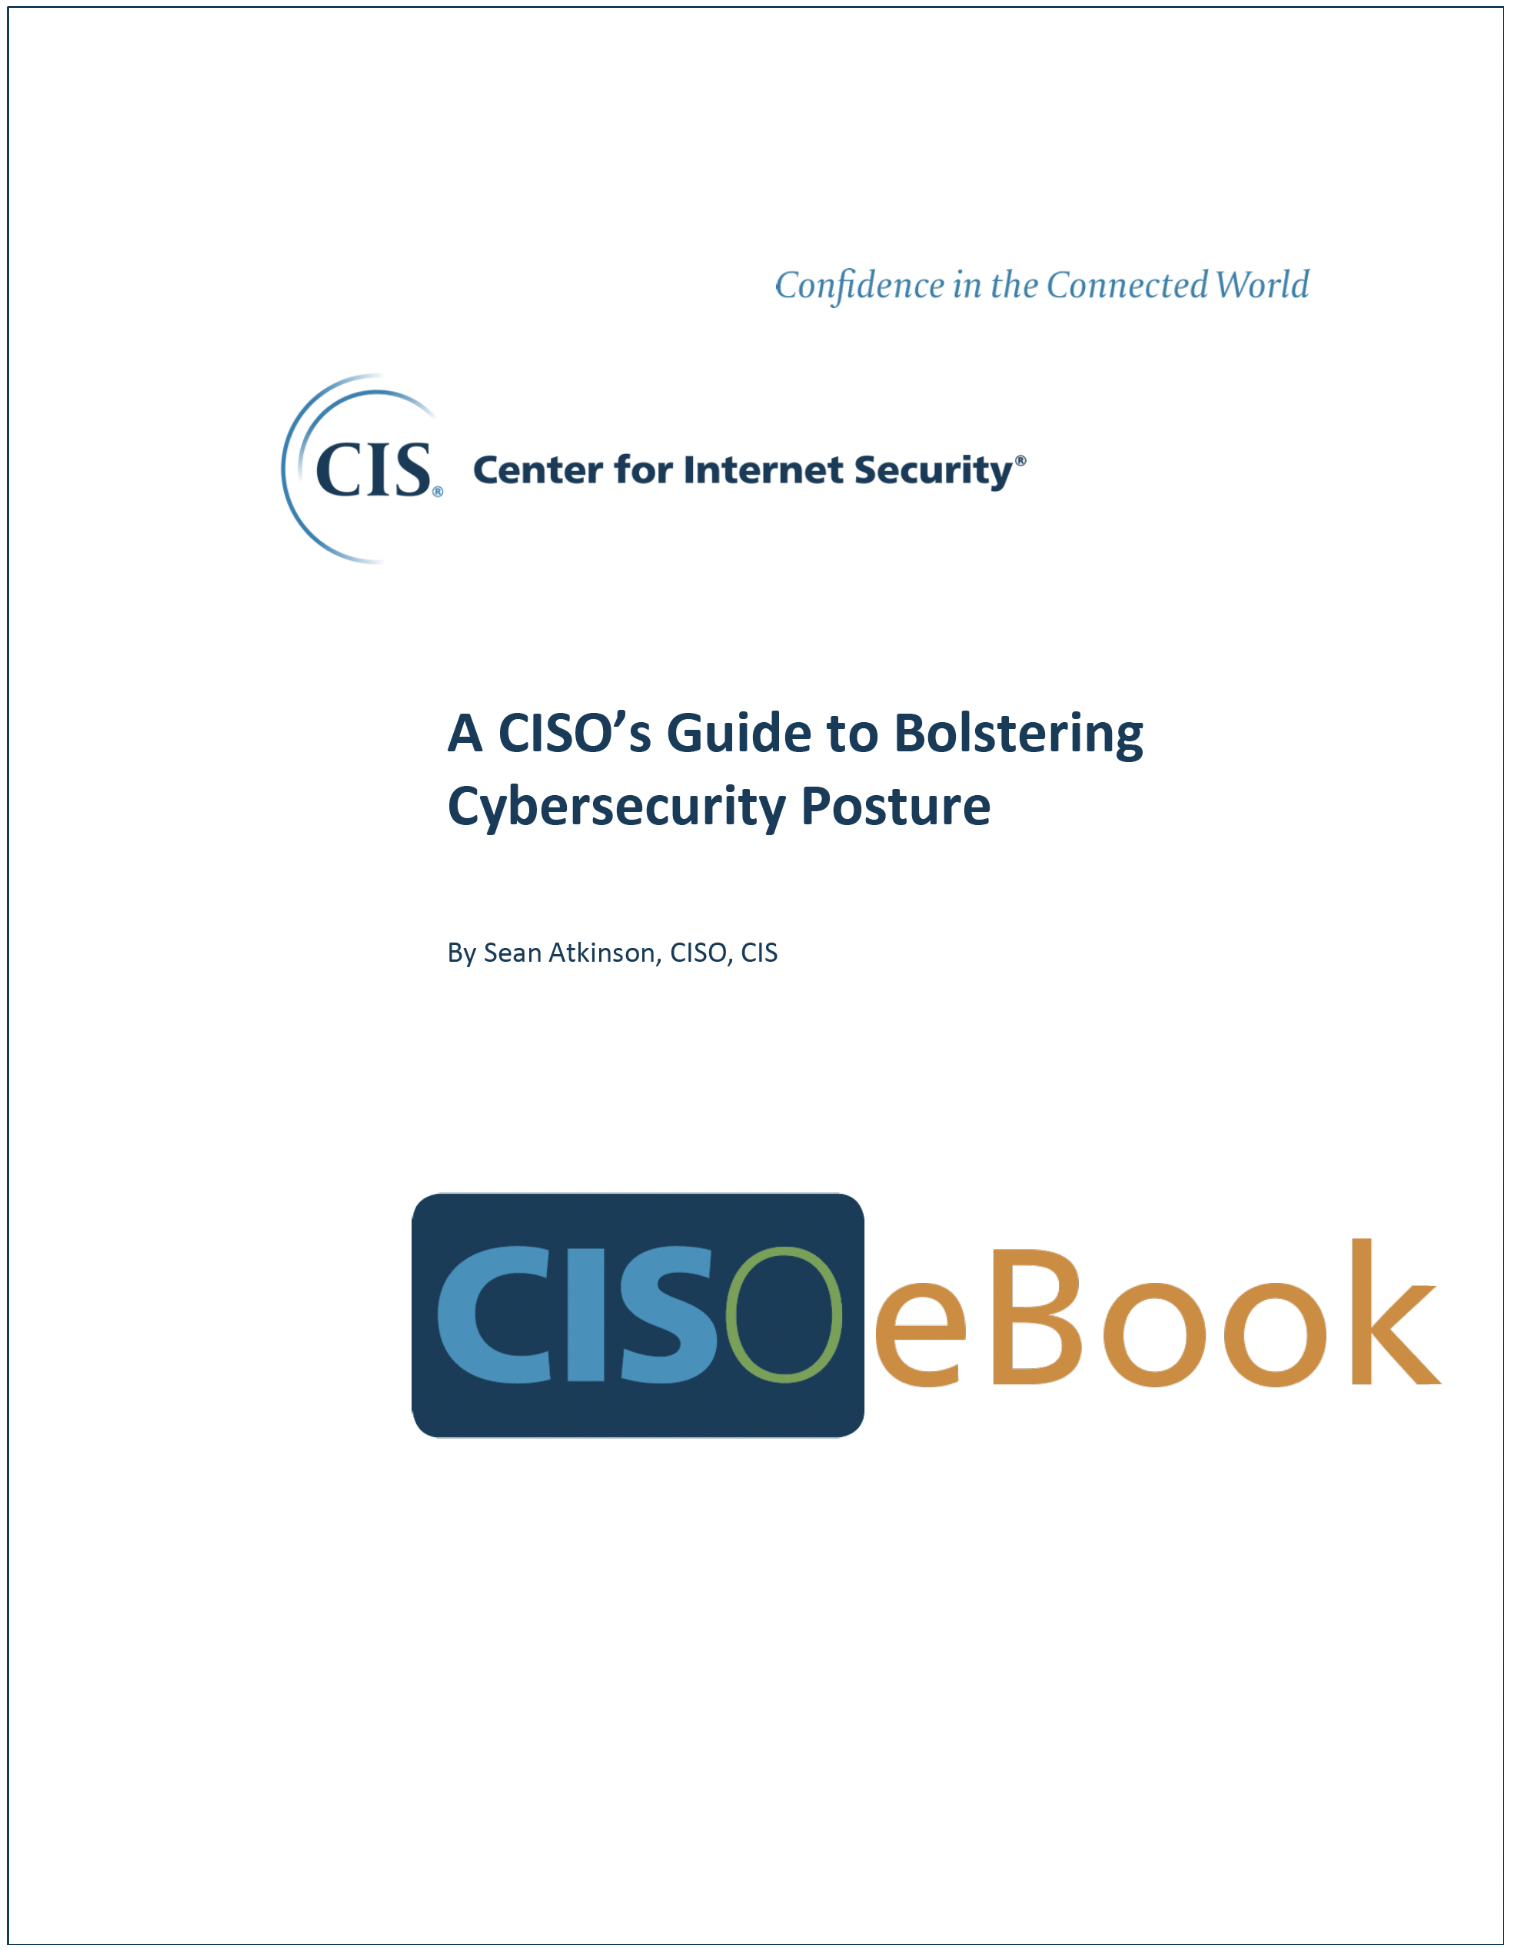 eBook: A CISO’s Guide to Bolstering Cybersecurity Posture